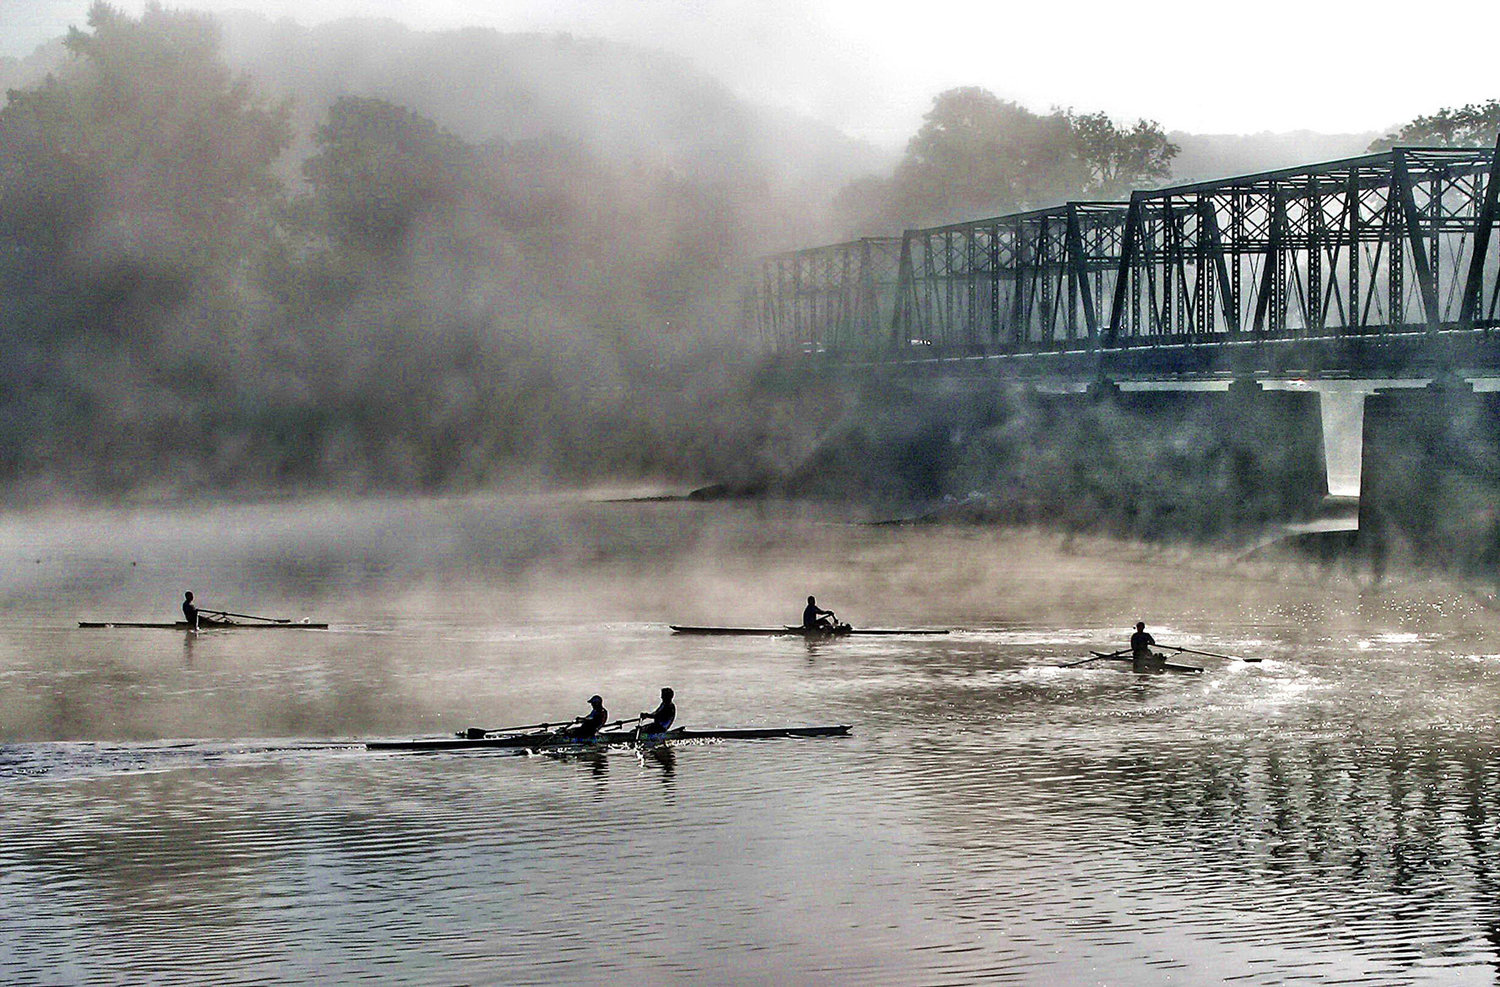 “Misty Morning in New Hope” is a digital photograph by Gordon Nieburg.